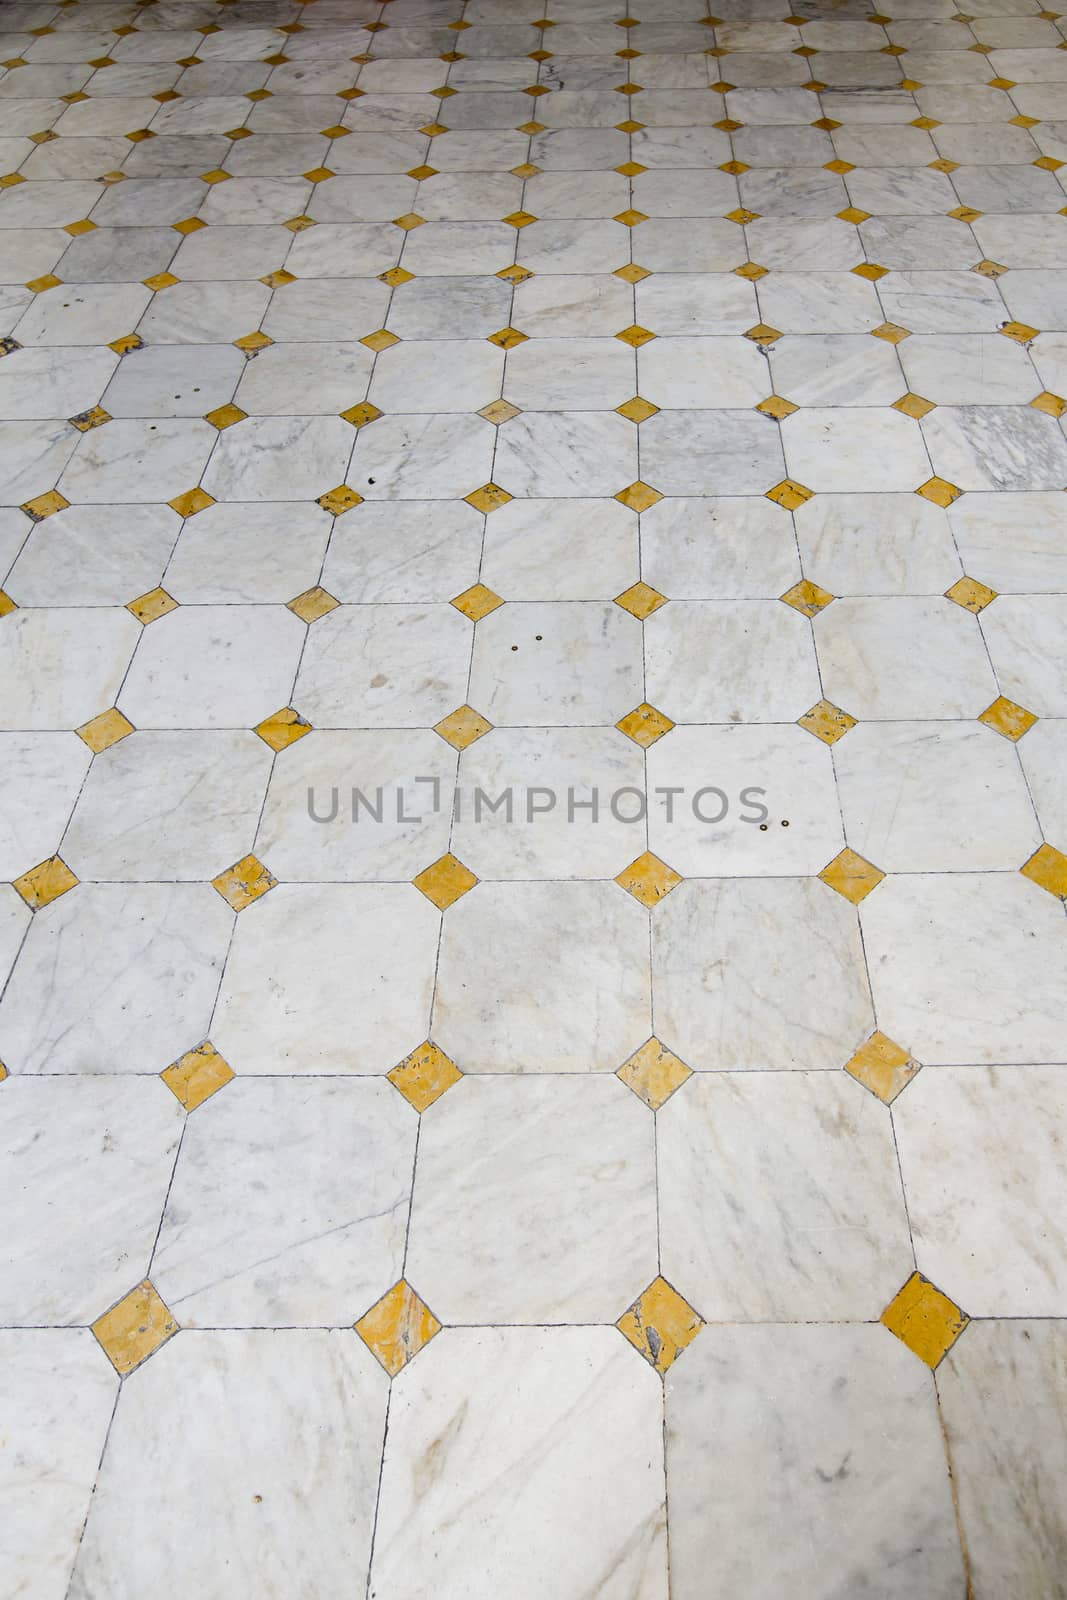 Triangle tiles floor in house